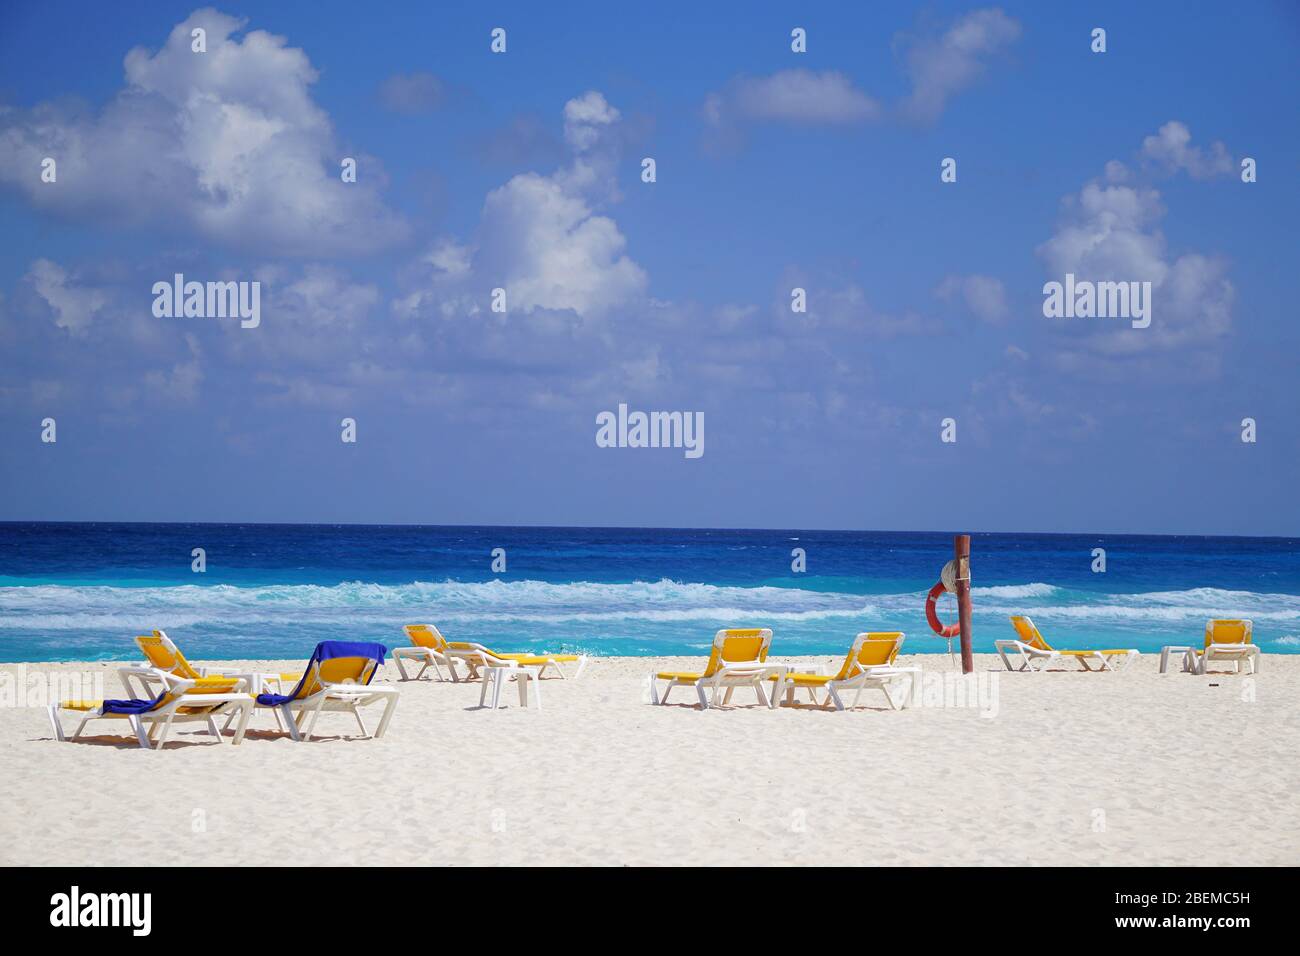 Quiet beach, blue sky, turquoise water, Cancun Mexico Stock Photo